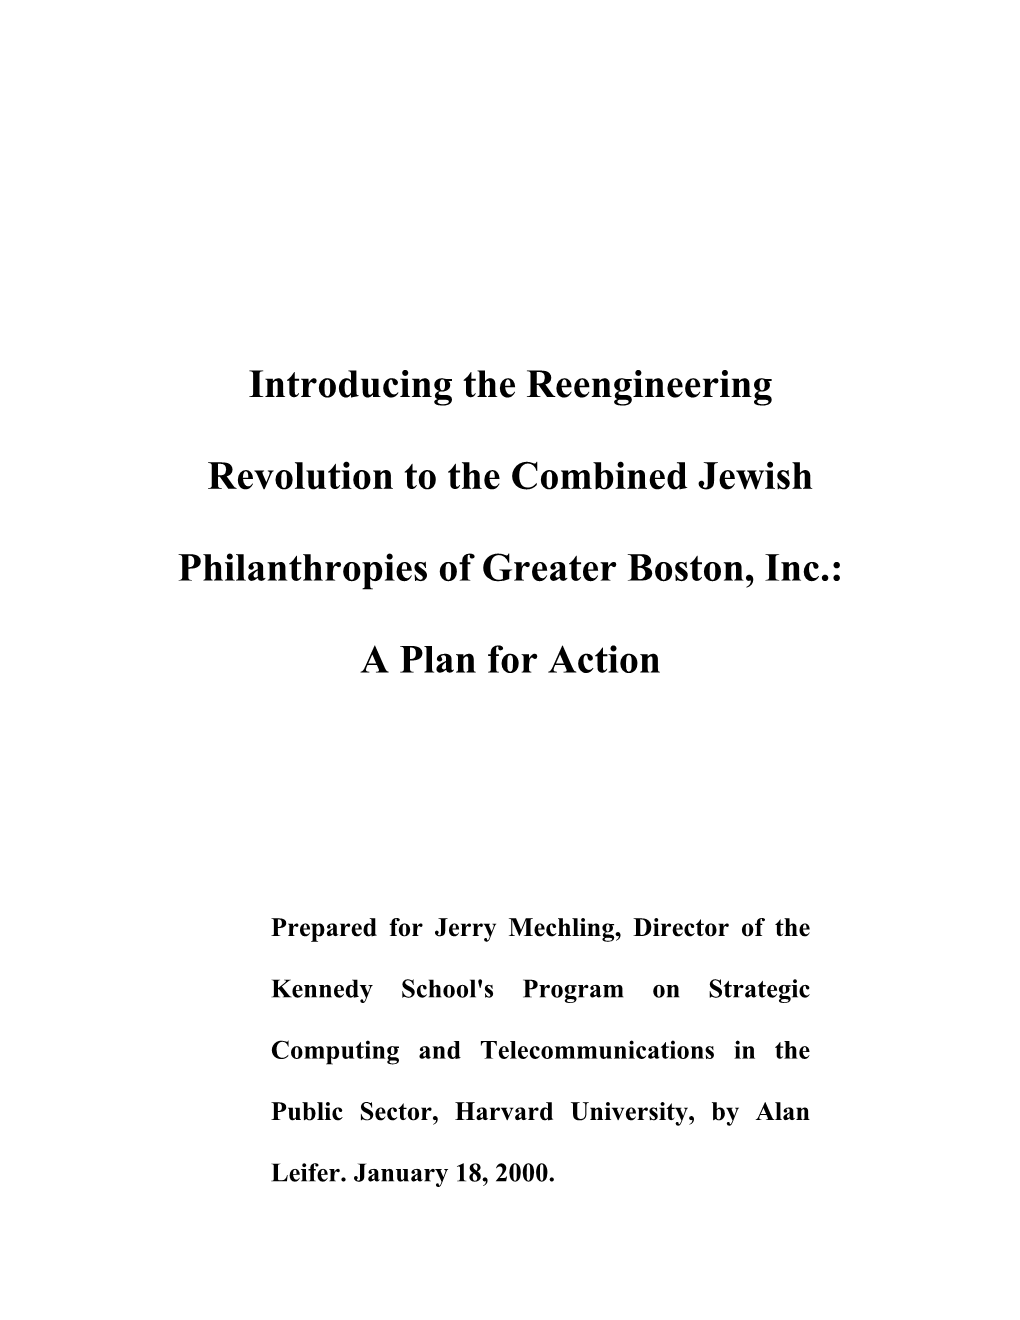 Introducing the Reengineering Revolution to the Combined Jewish Philanthropies of Greater